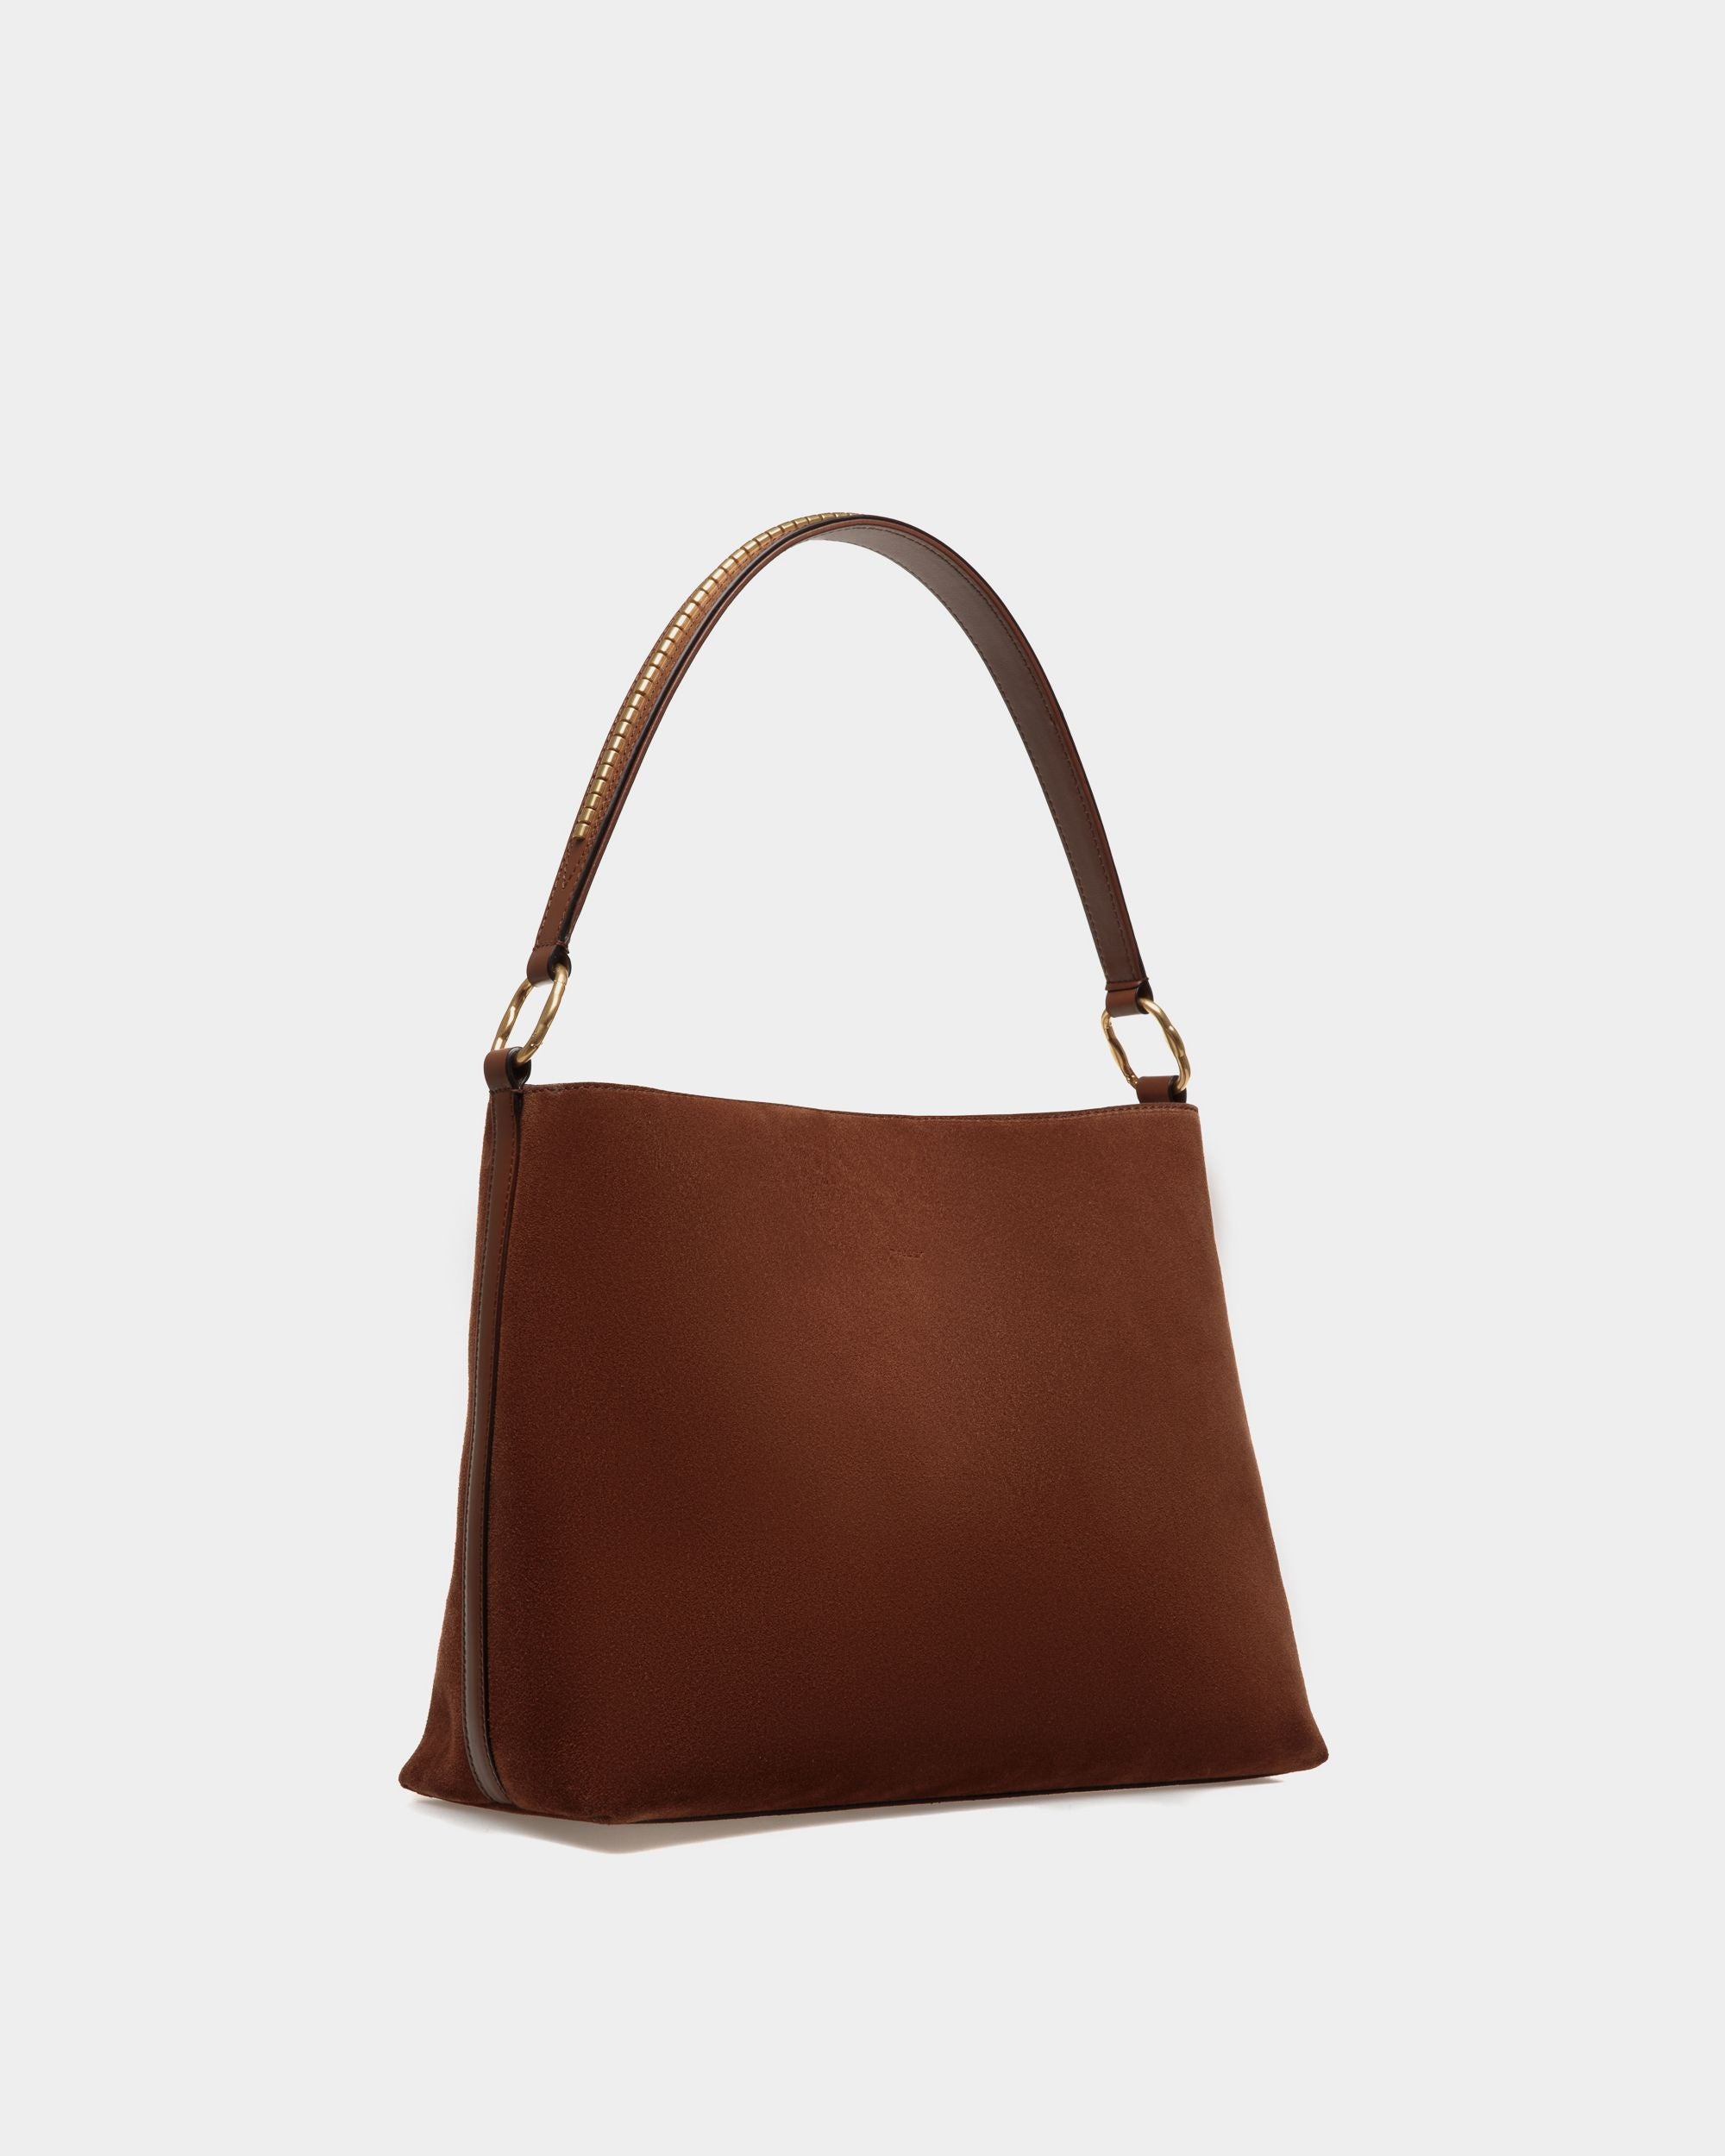 Arkle | Women's Hobo Bag in Brown Suede | Bally | Still Life 3/4 Front